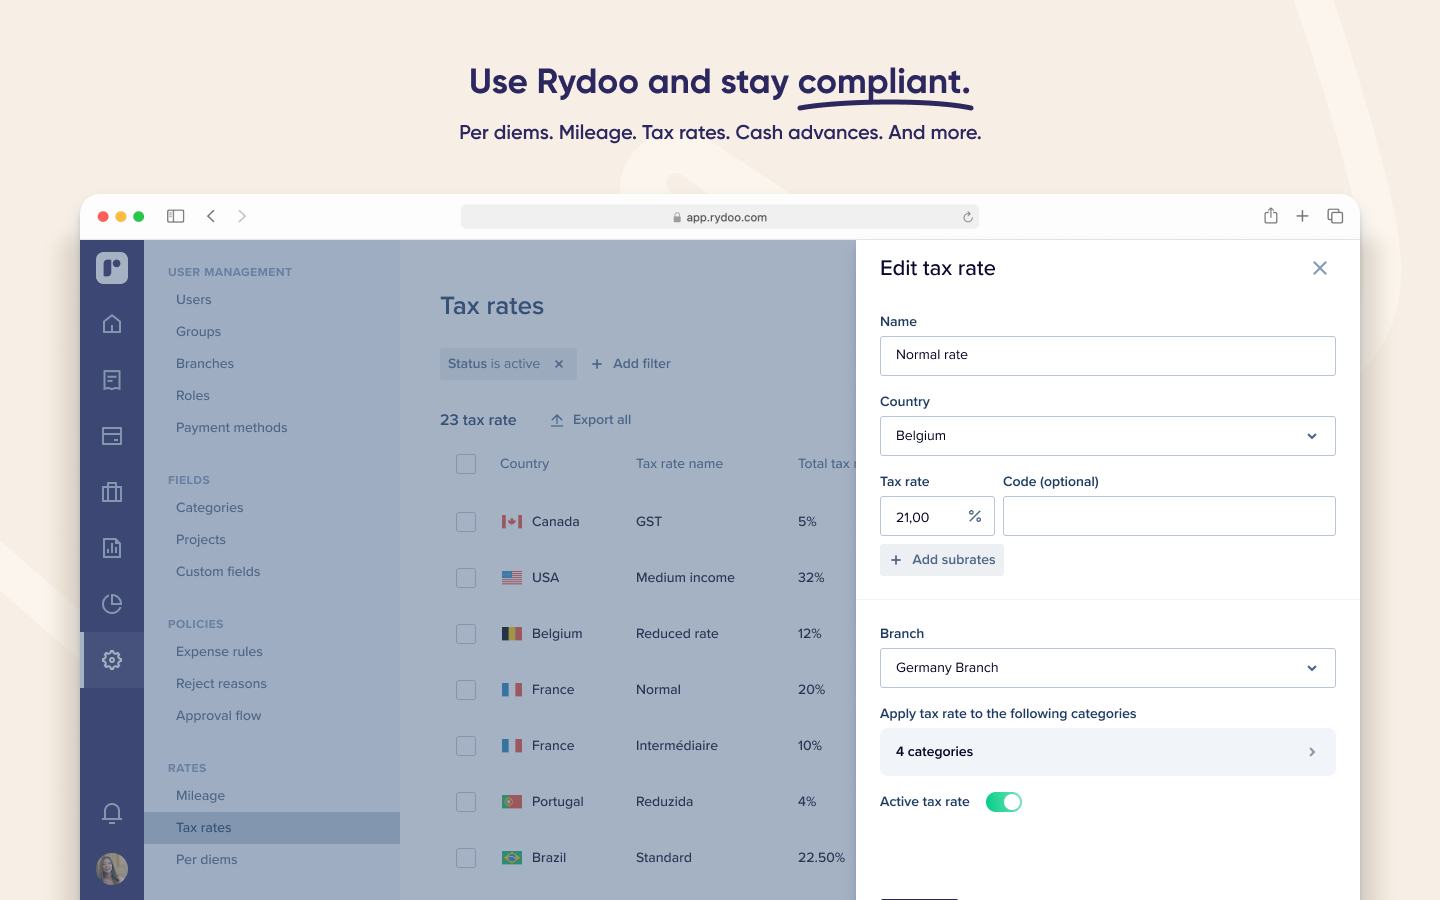 Use Rydoo and stay compliant: Per diems, mileage, tax rates, cash advances and more.